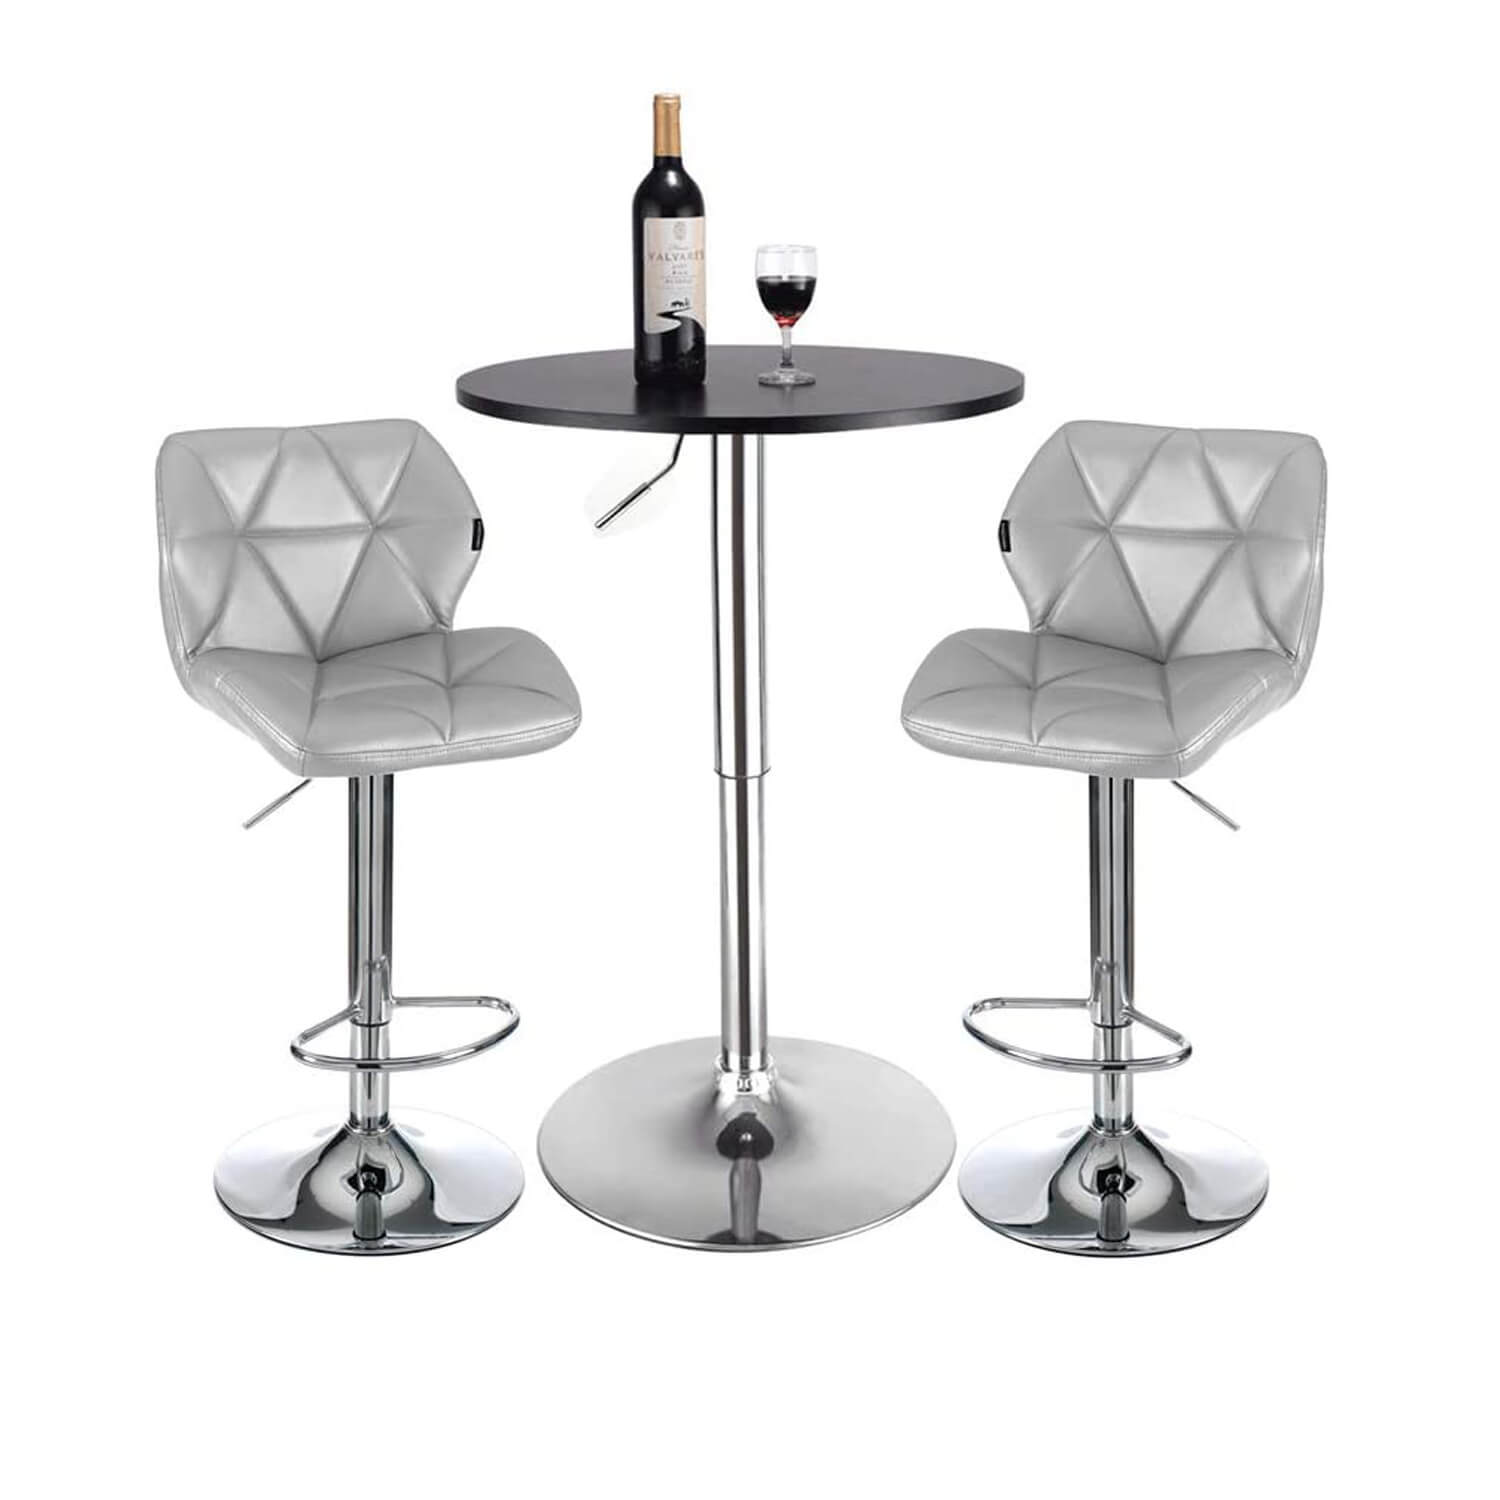 Elecwish Bar Table Set 3-Piece OW0301 black bar table with silver bar stools